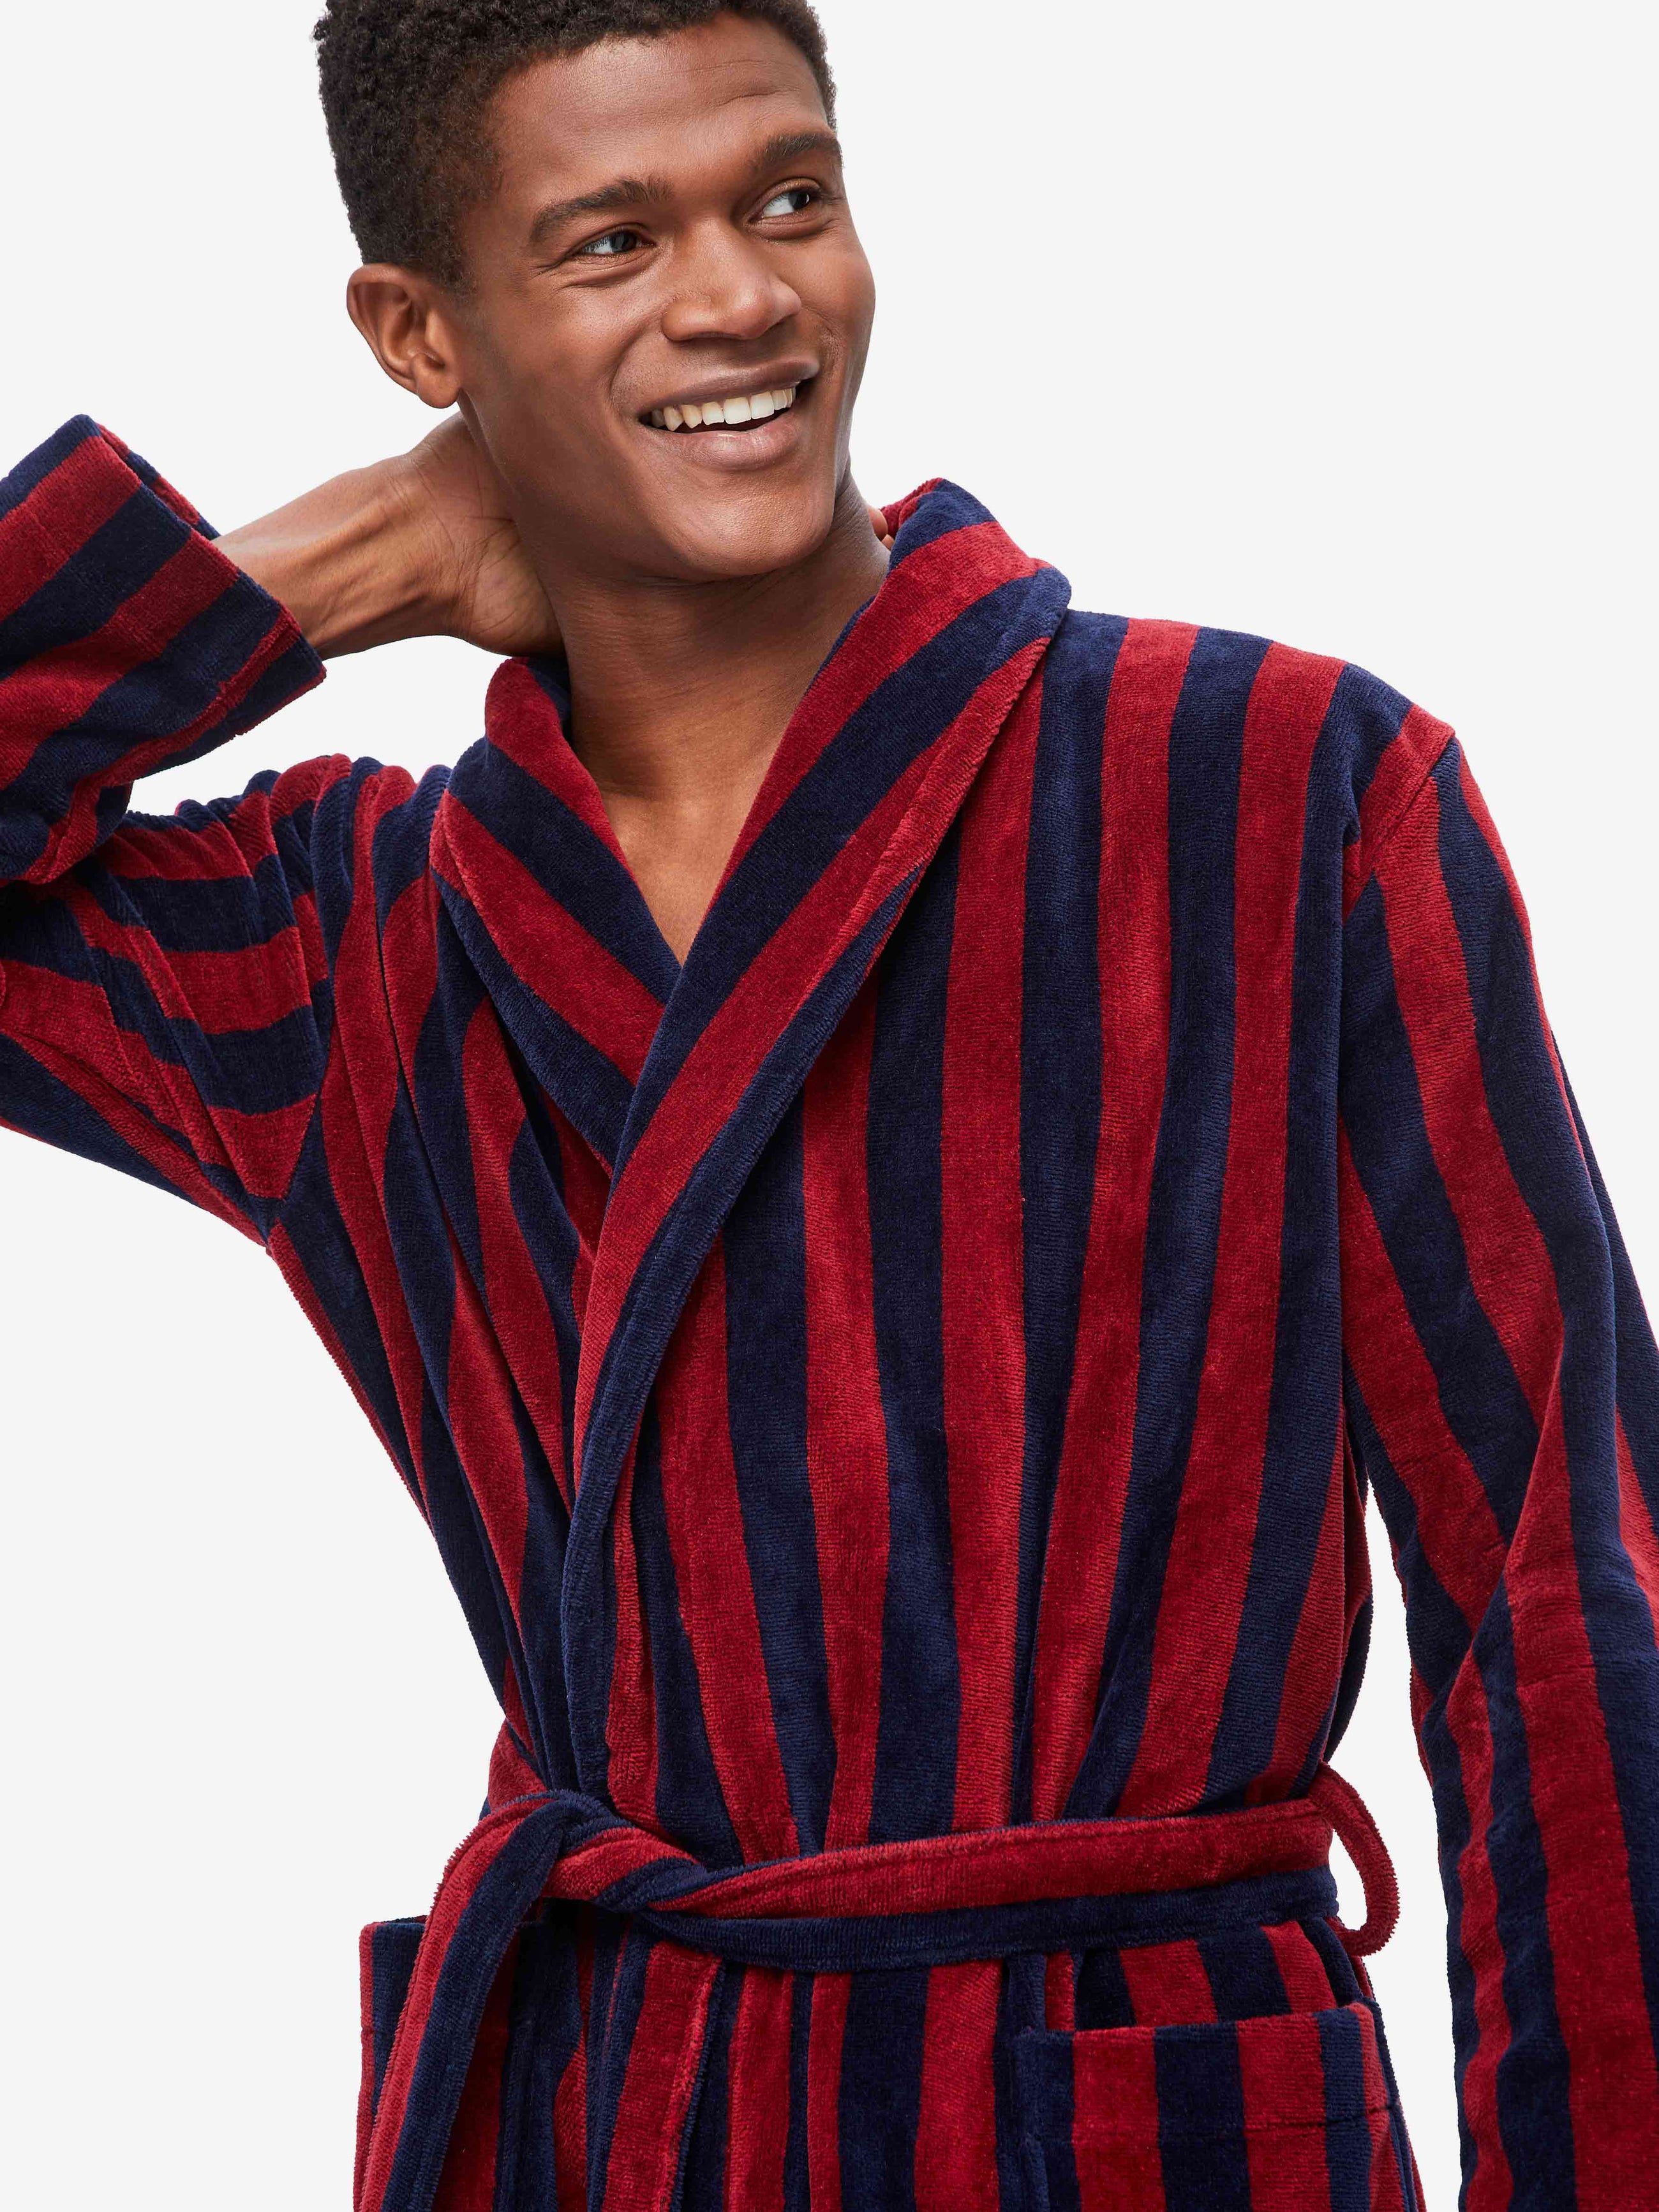 Men's Robes: How Do You Choose a Men's Robe That's Comfortable For Dif